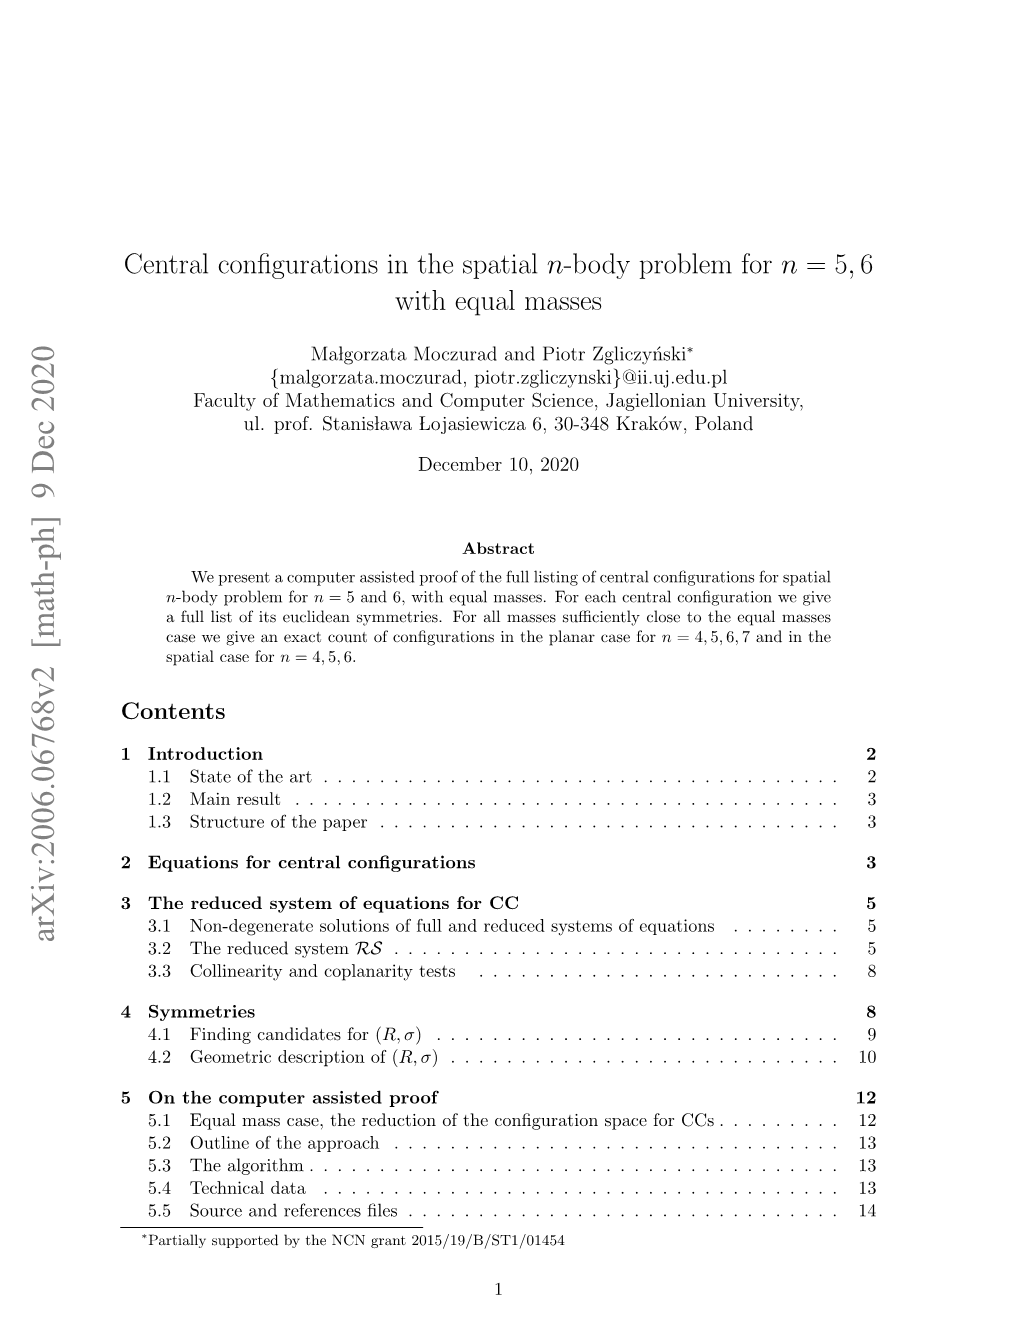 Central Configurations in the Spatial N-Body Problem for N = 5,6